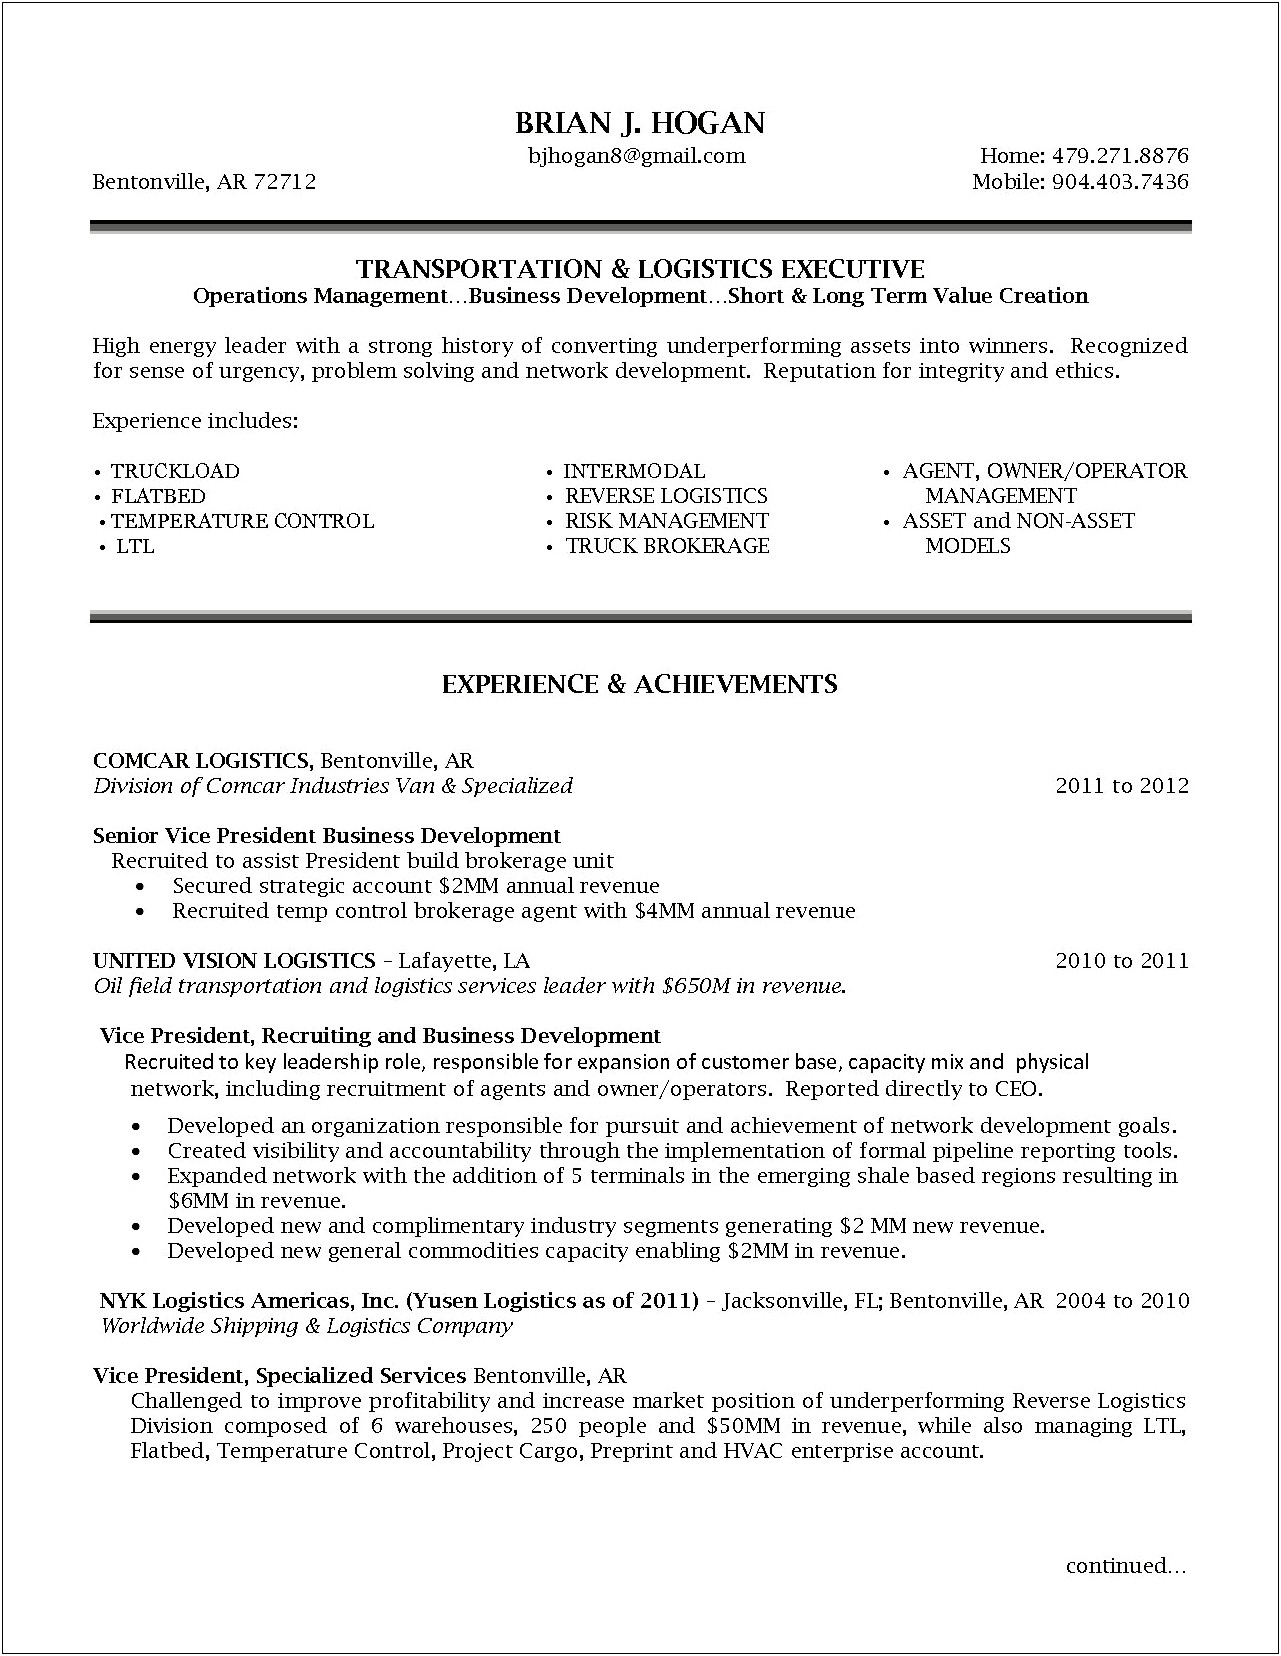 Resume Objective Examples For Transportation